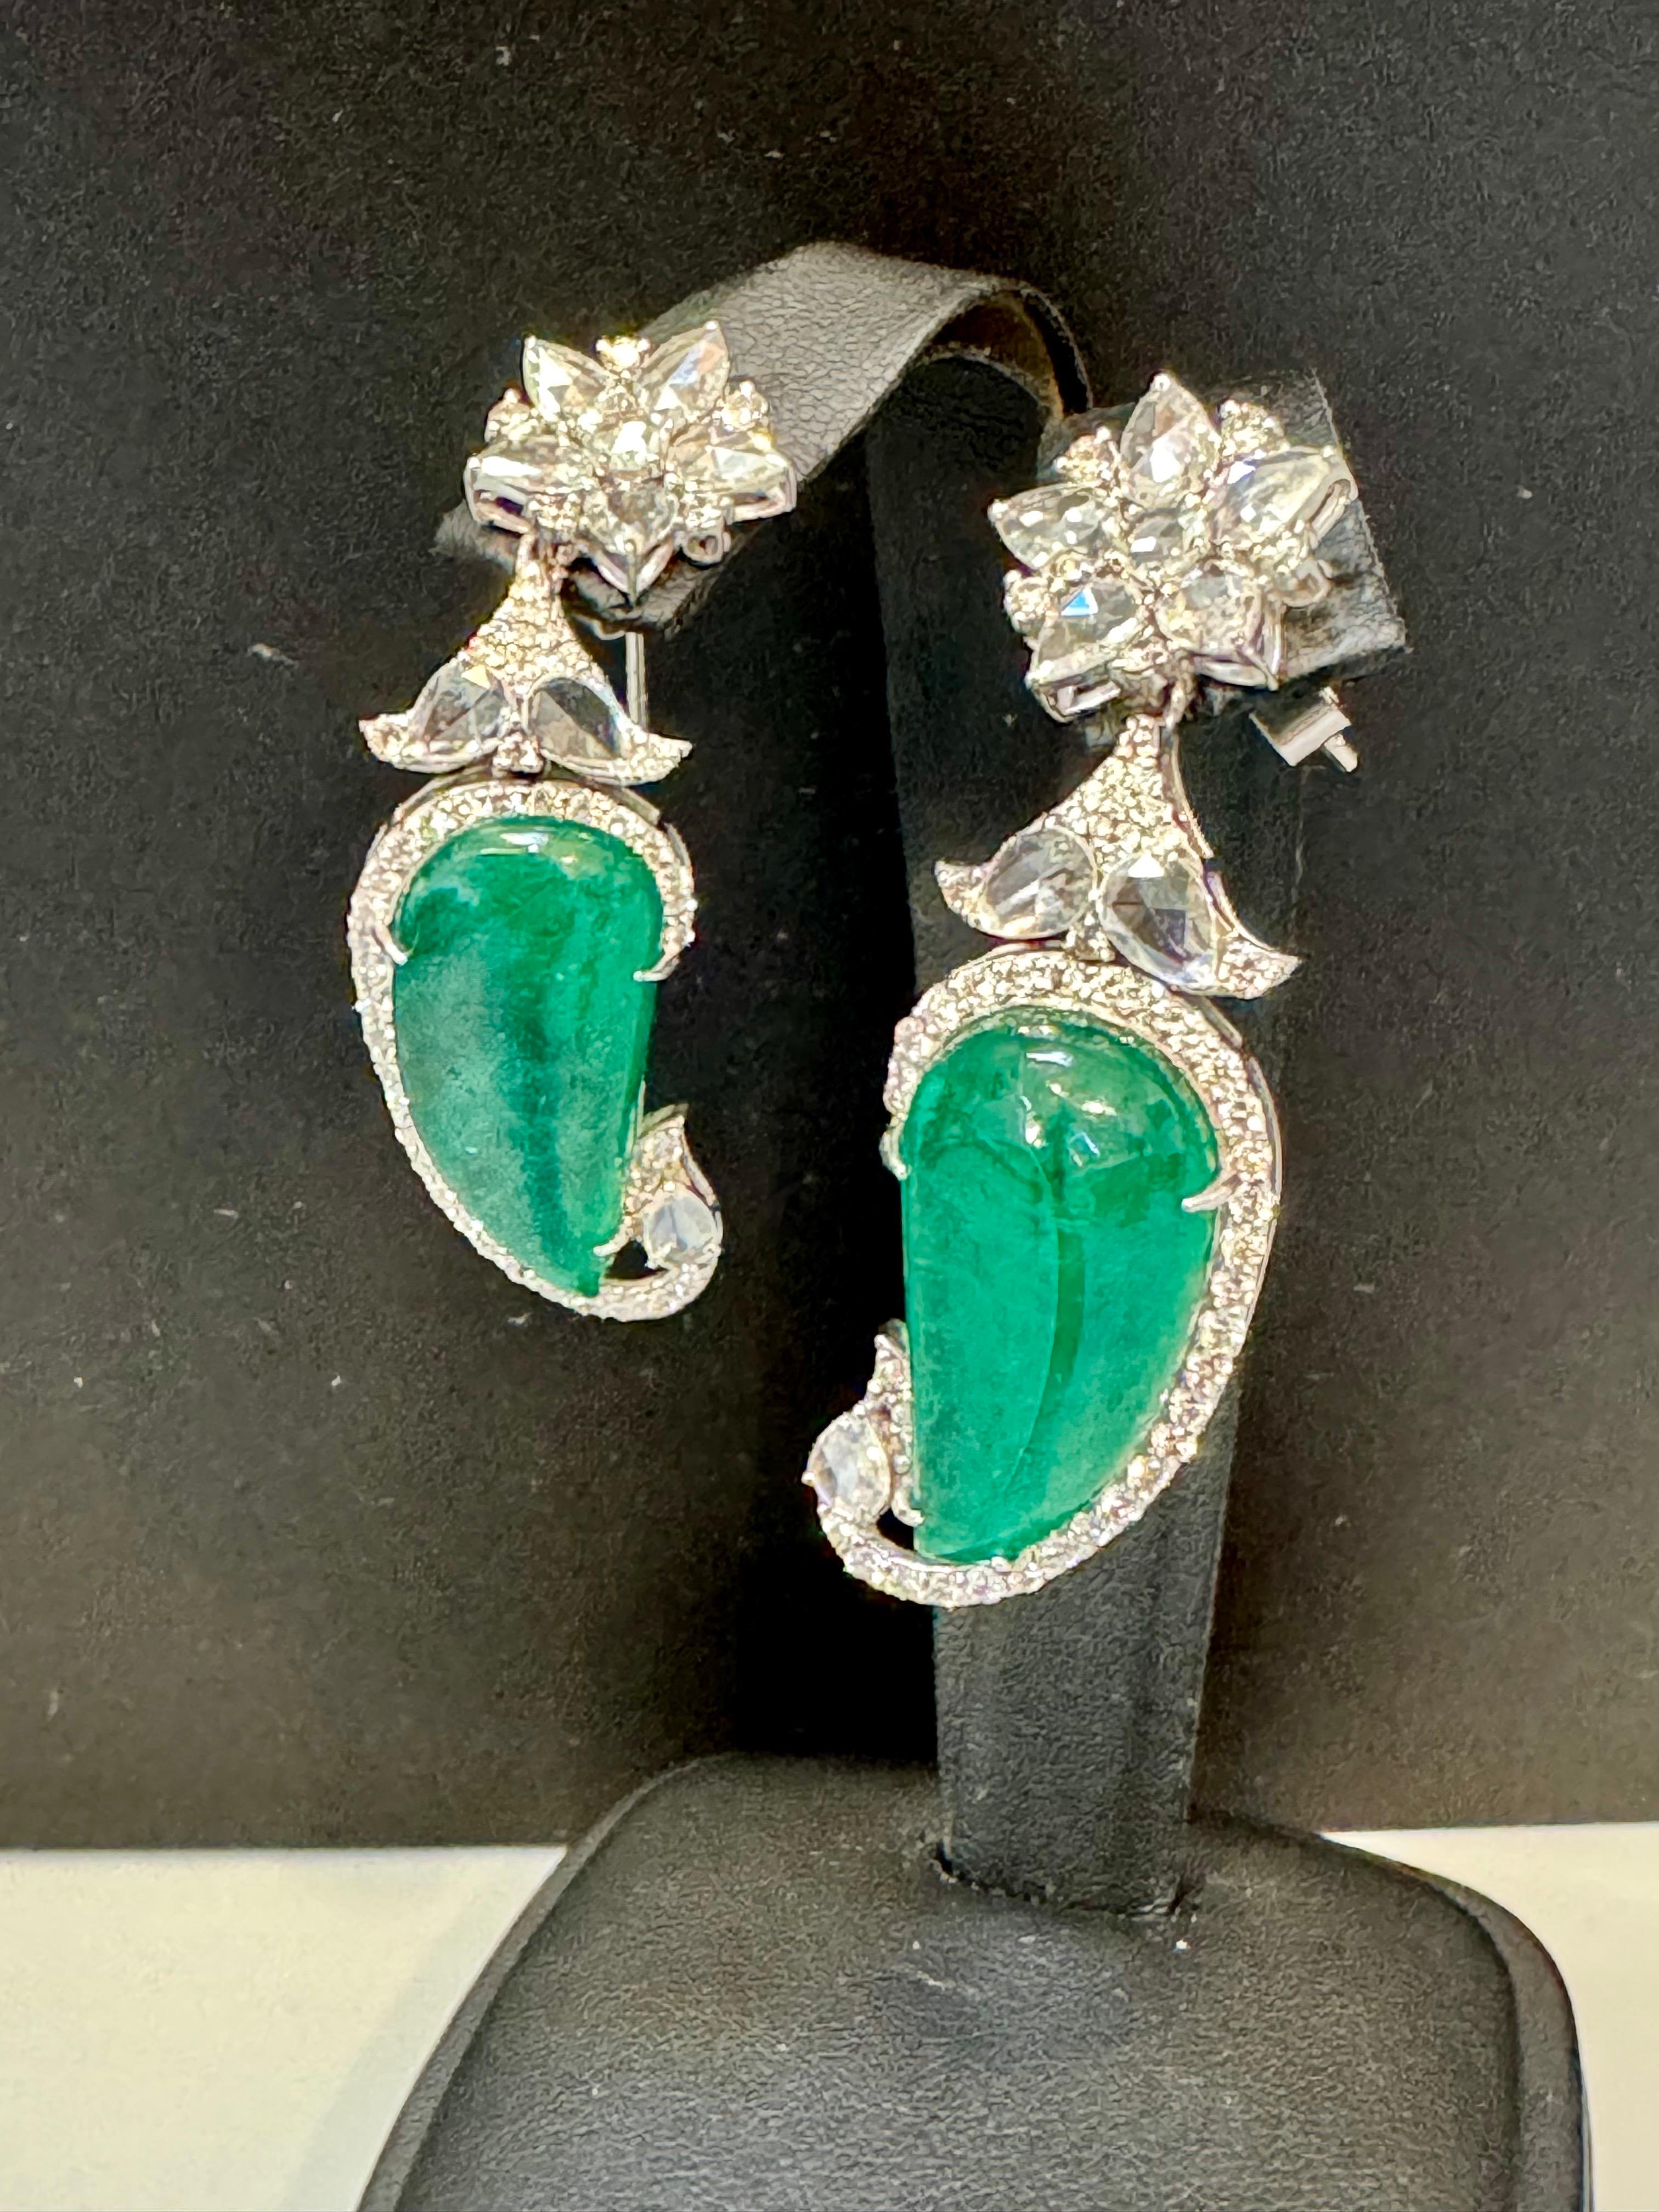 20 Ct Fine Emerald Cabochon & 4 Ct Rose Cut Diamond  18 Kt White Gold  Earrings For Sale 1